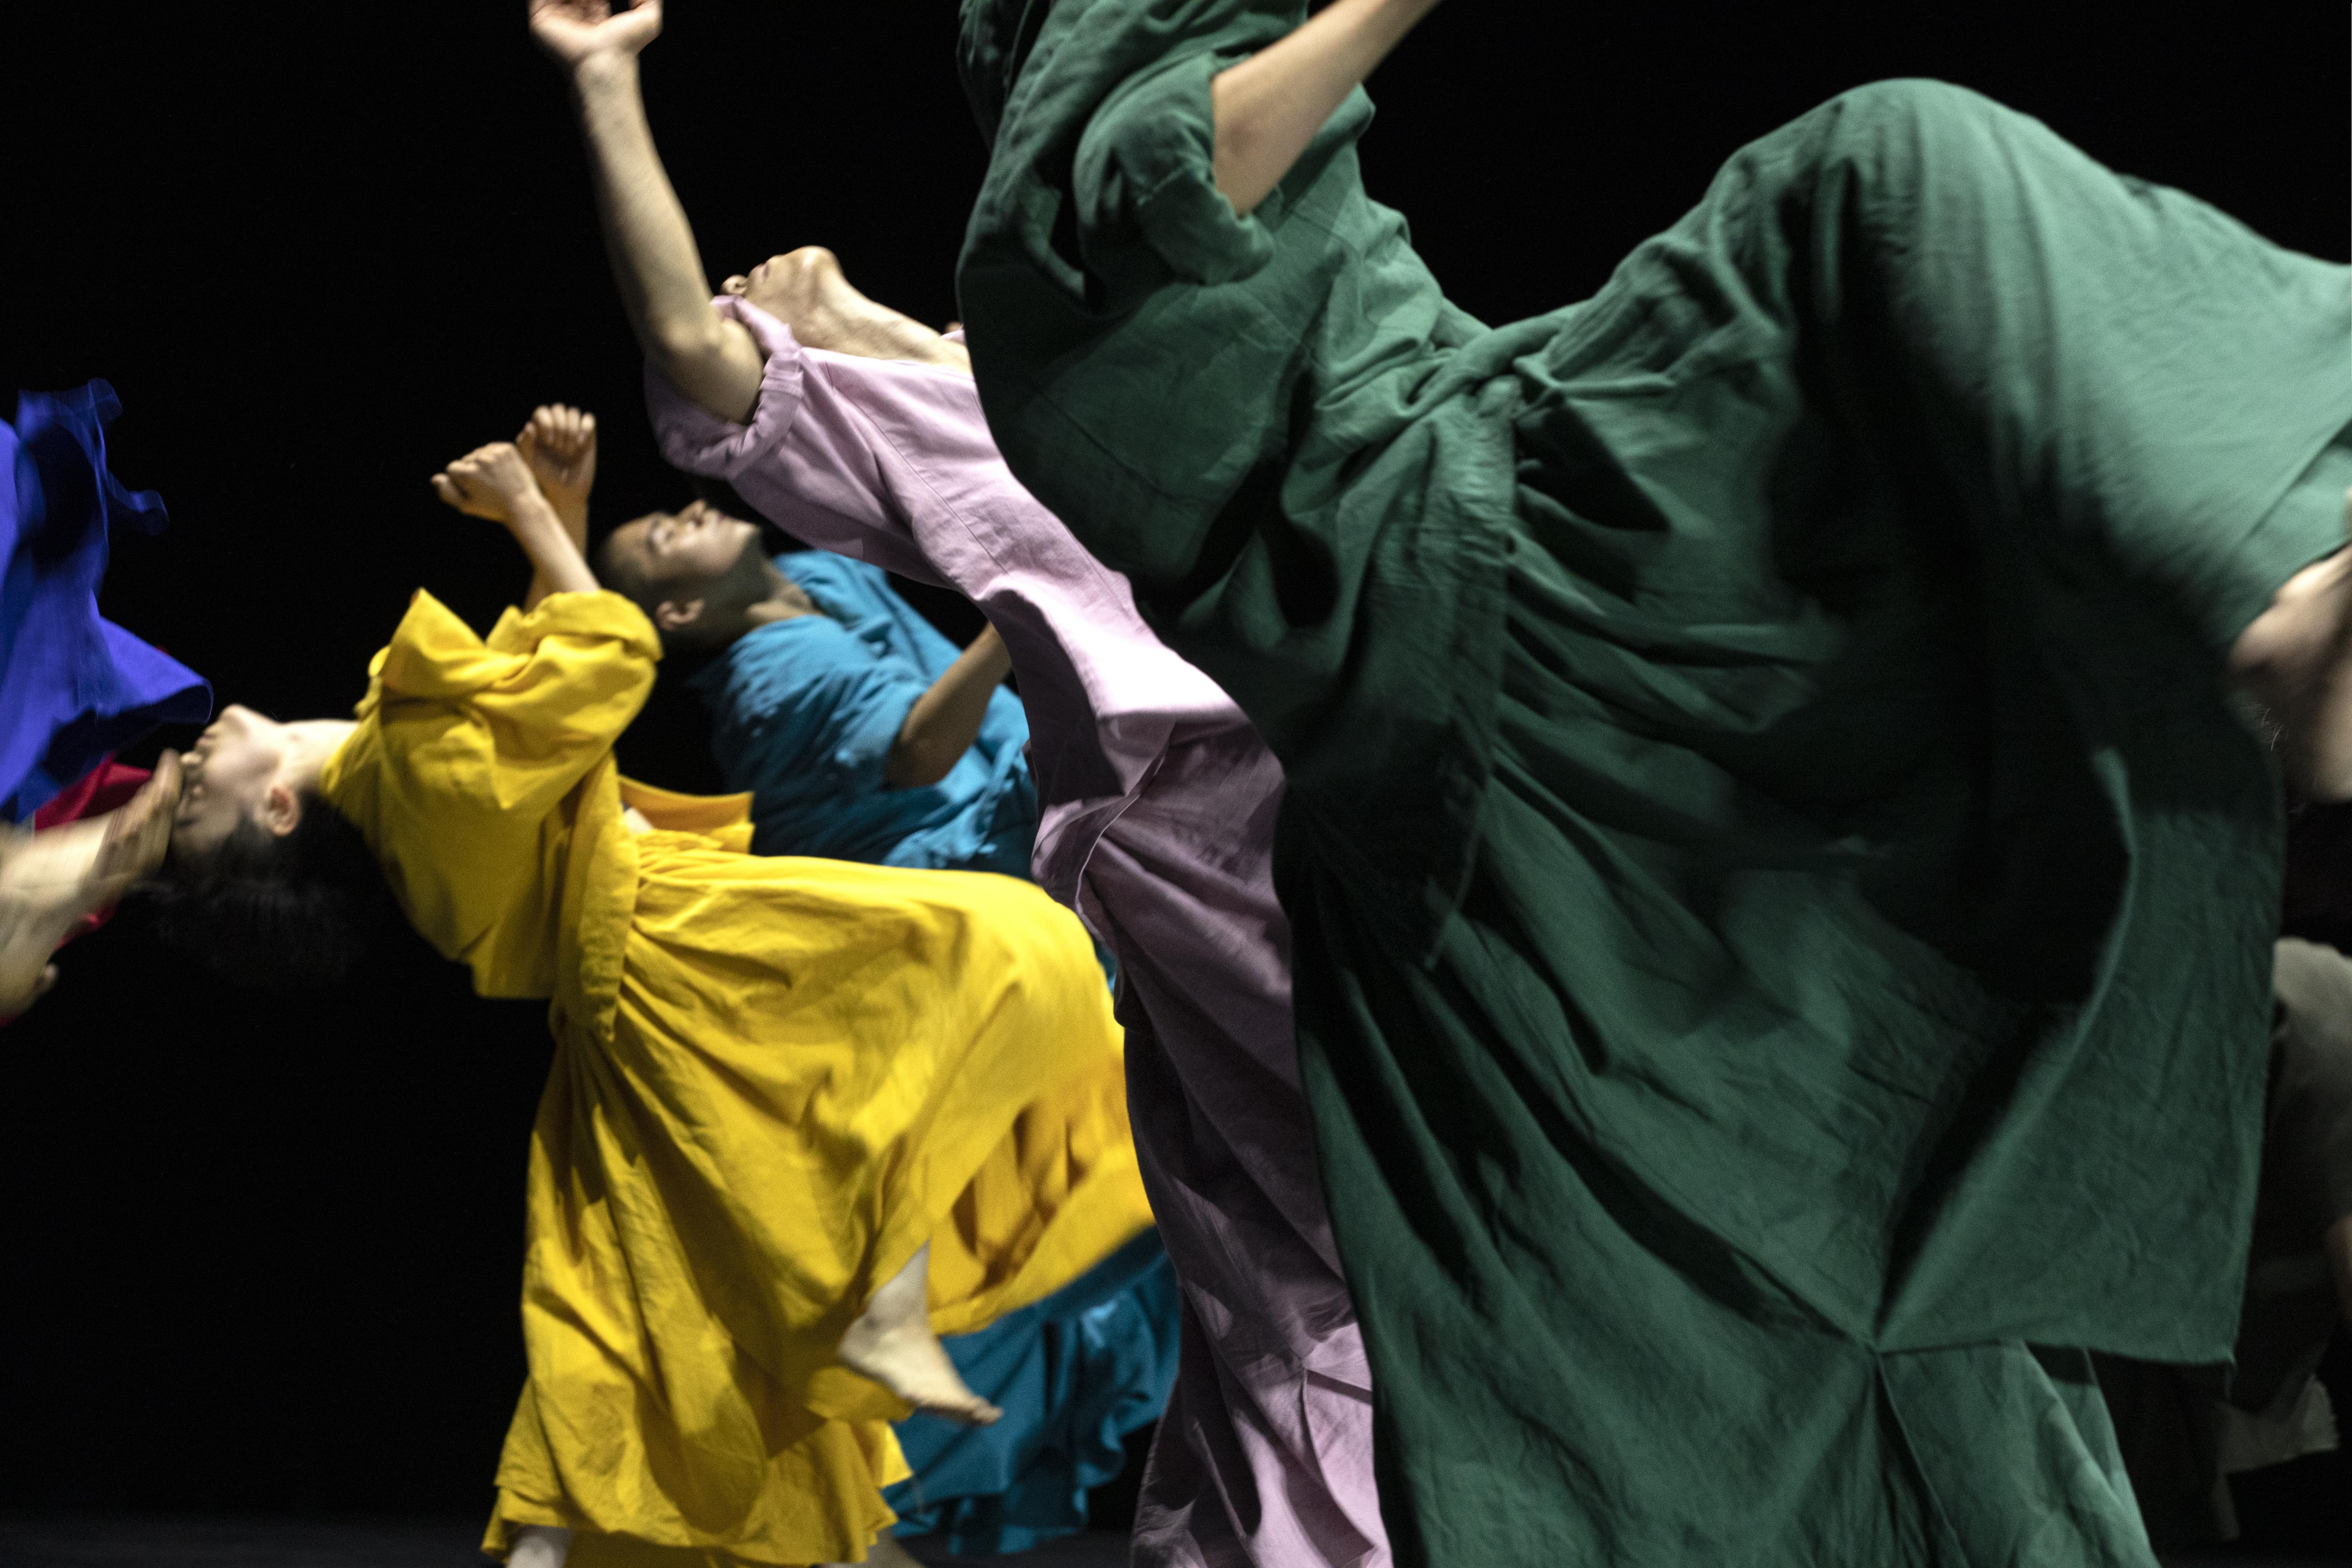 Dancers in colorful long dresses, excerpt from “14”